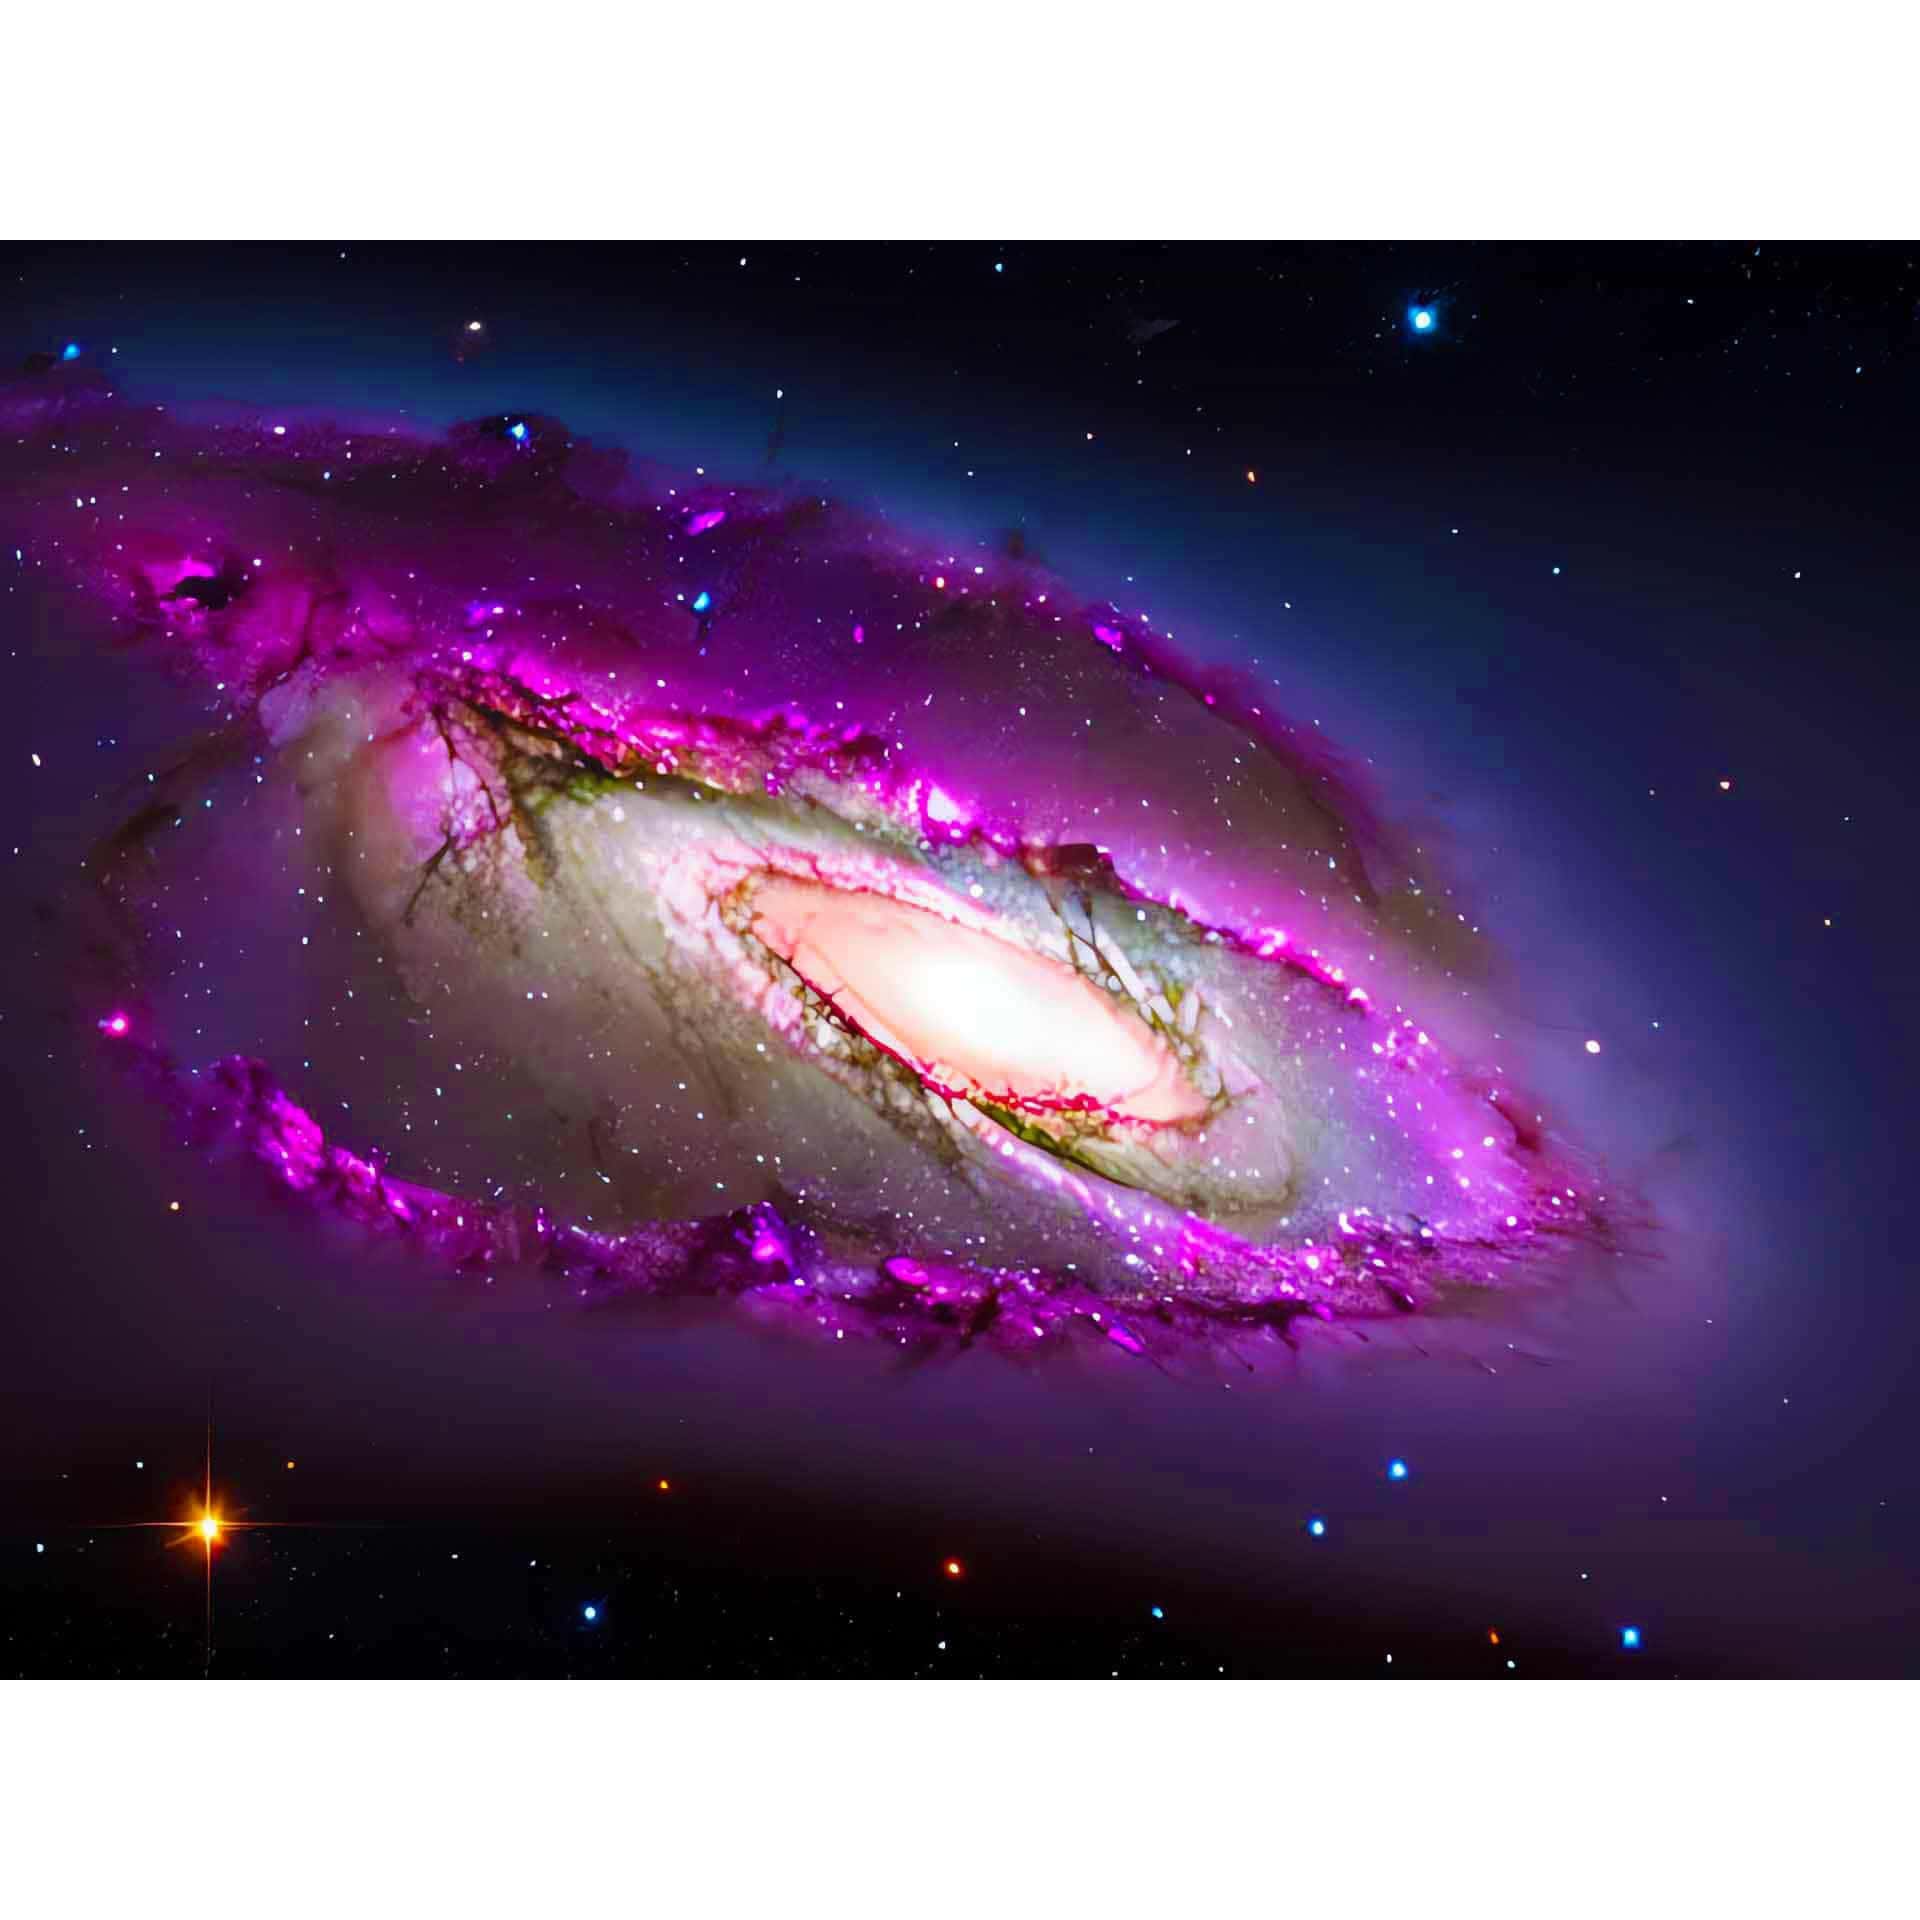 Diamond Painting - Galaxy in Violette - gedruckt in Ultra-HD - Horizontal, Weltall